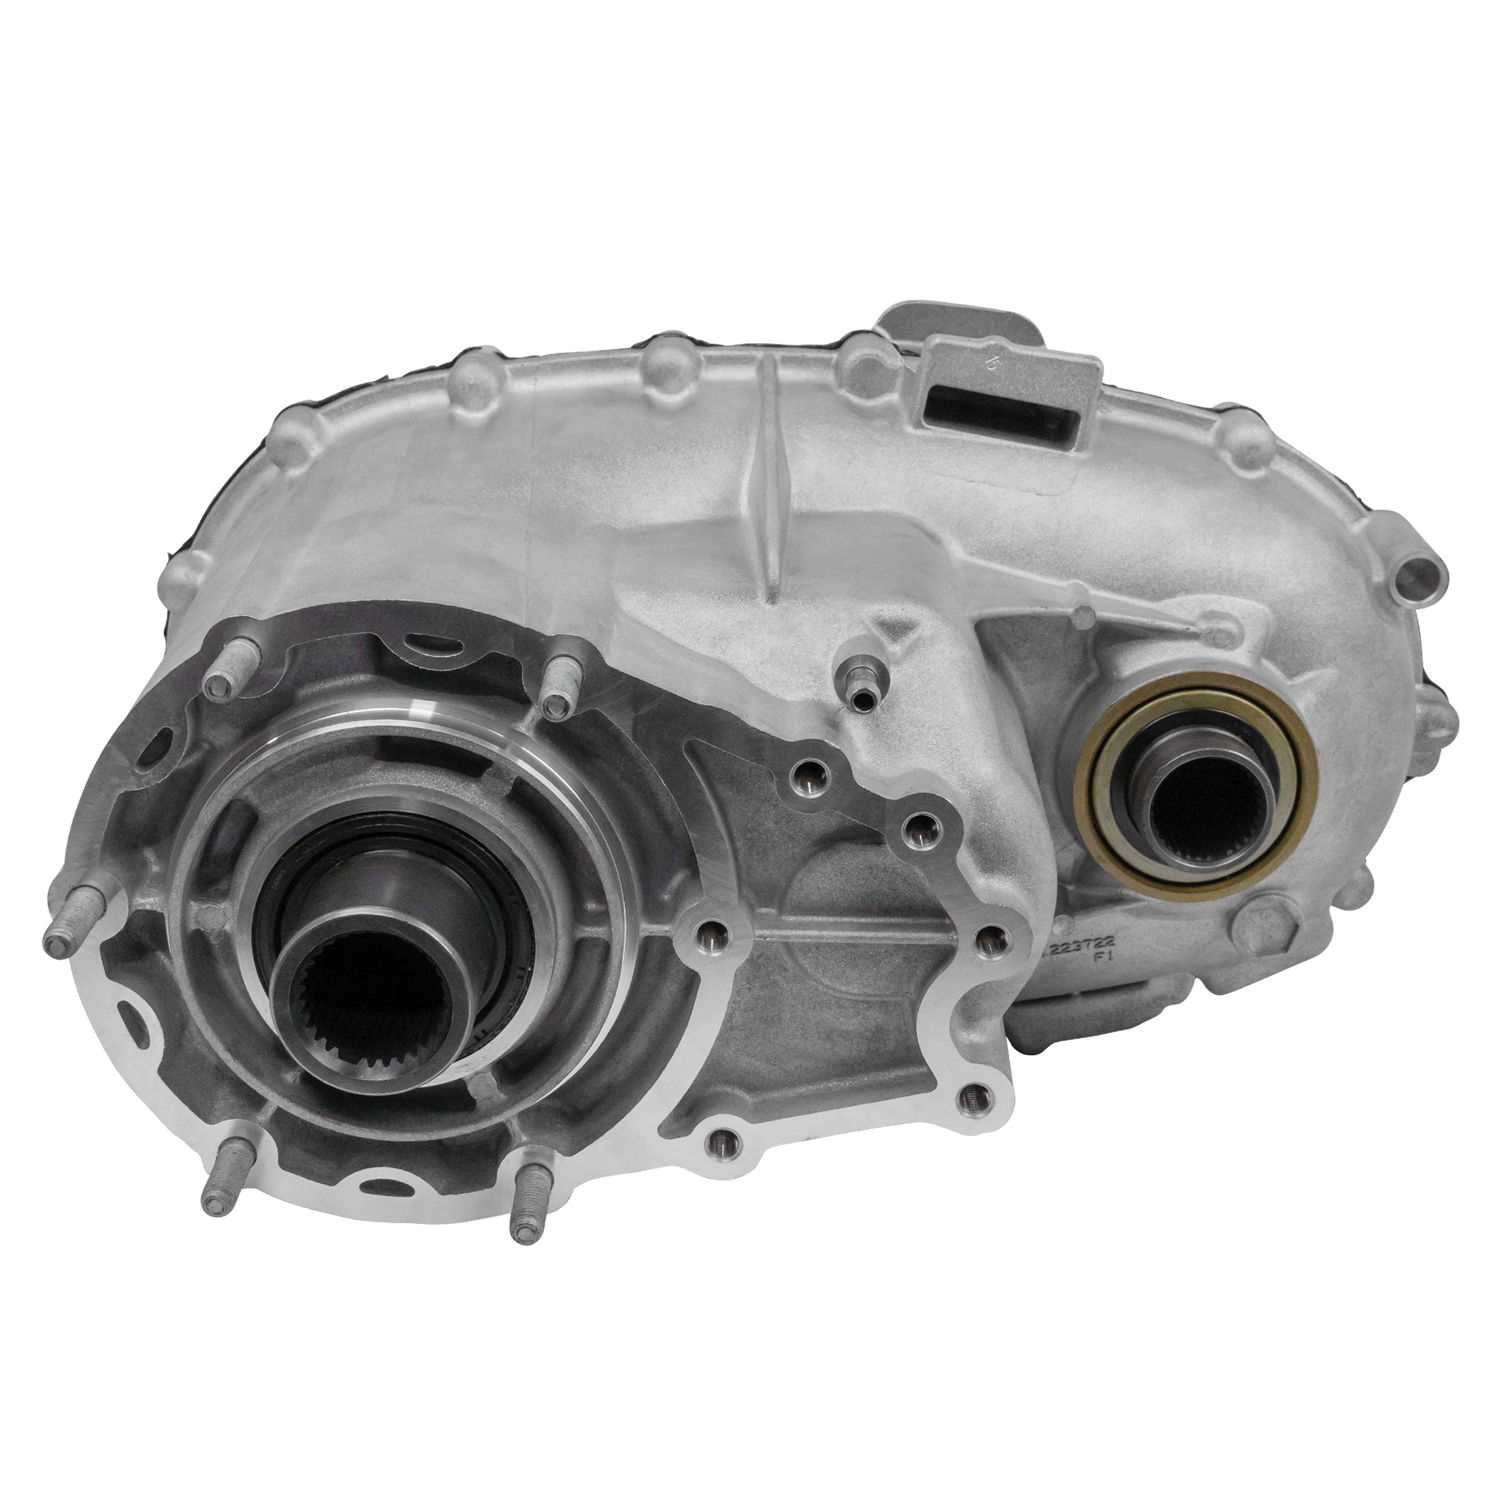 Remanufactured MP1626 Electric Shift Transfer Case, 2011-2019 Sierra And Silverado 2500/3500, And 2009-2010 Suburban And Yukon XL 2500, 6.0L Gas, With Option Code NQF. Shift Motor Not Included.